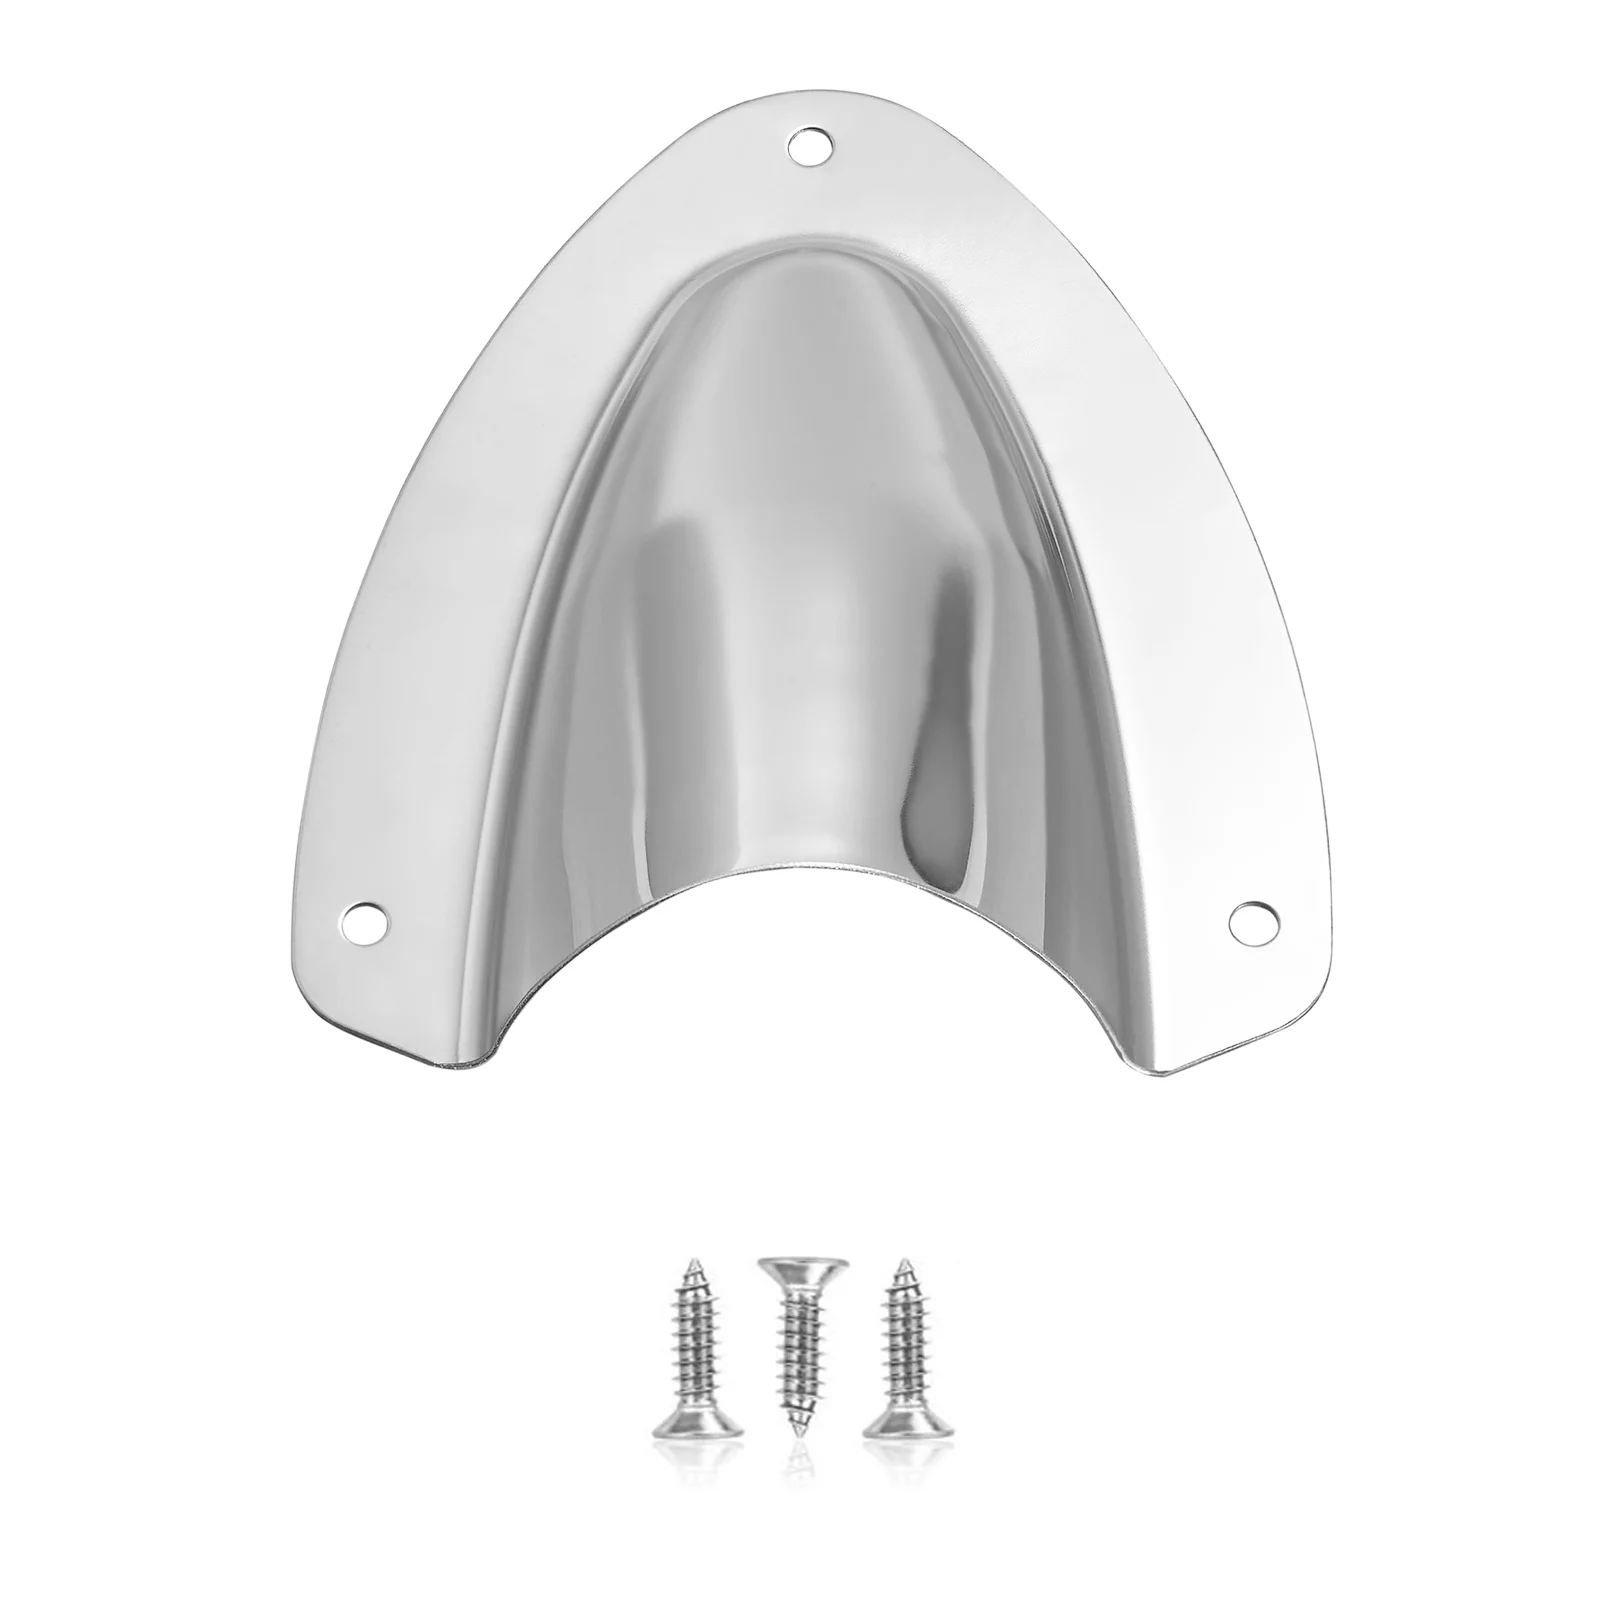 Clam shell Vent for Boat Optional 1 or 2, Size 3.24X2.16 Inch (57X55mm ), Stainless Steel Clamshell Vent, with  Screws